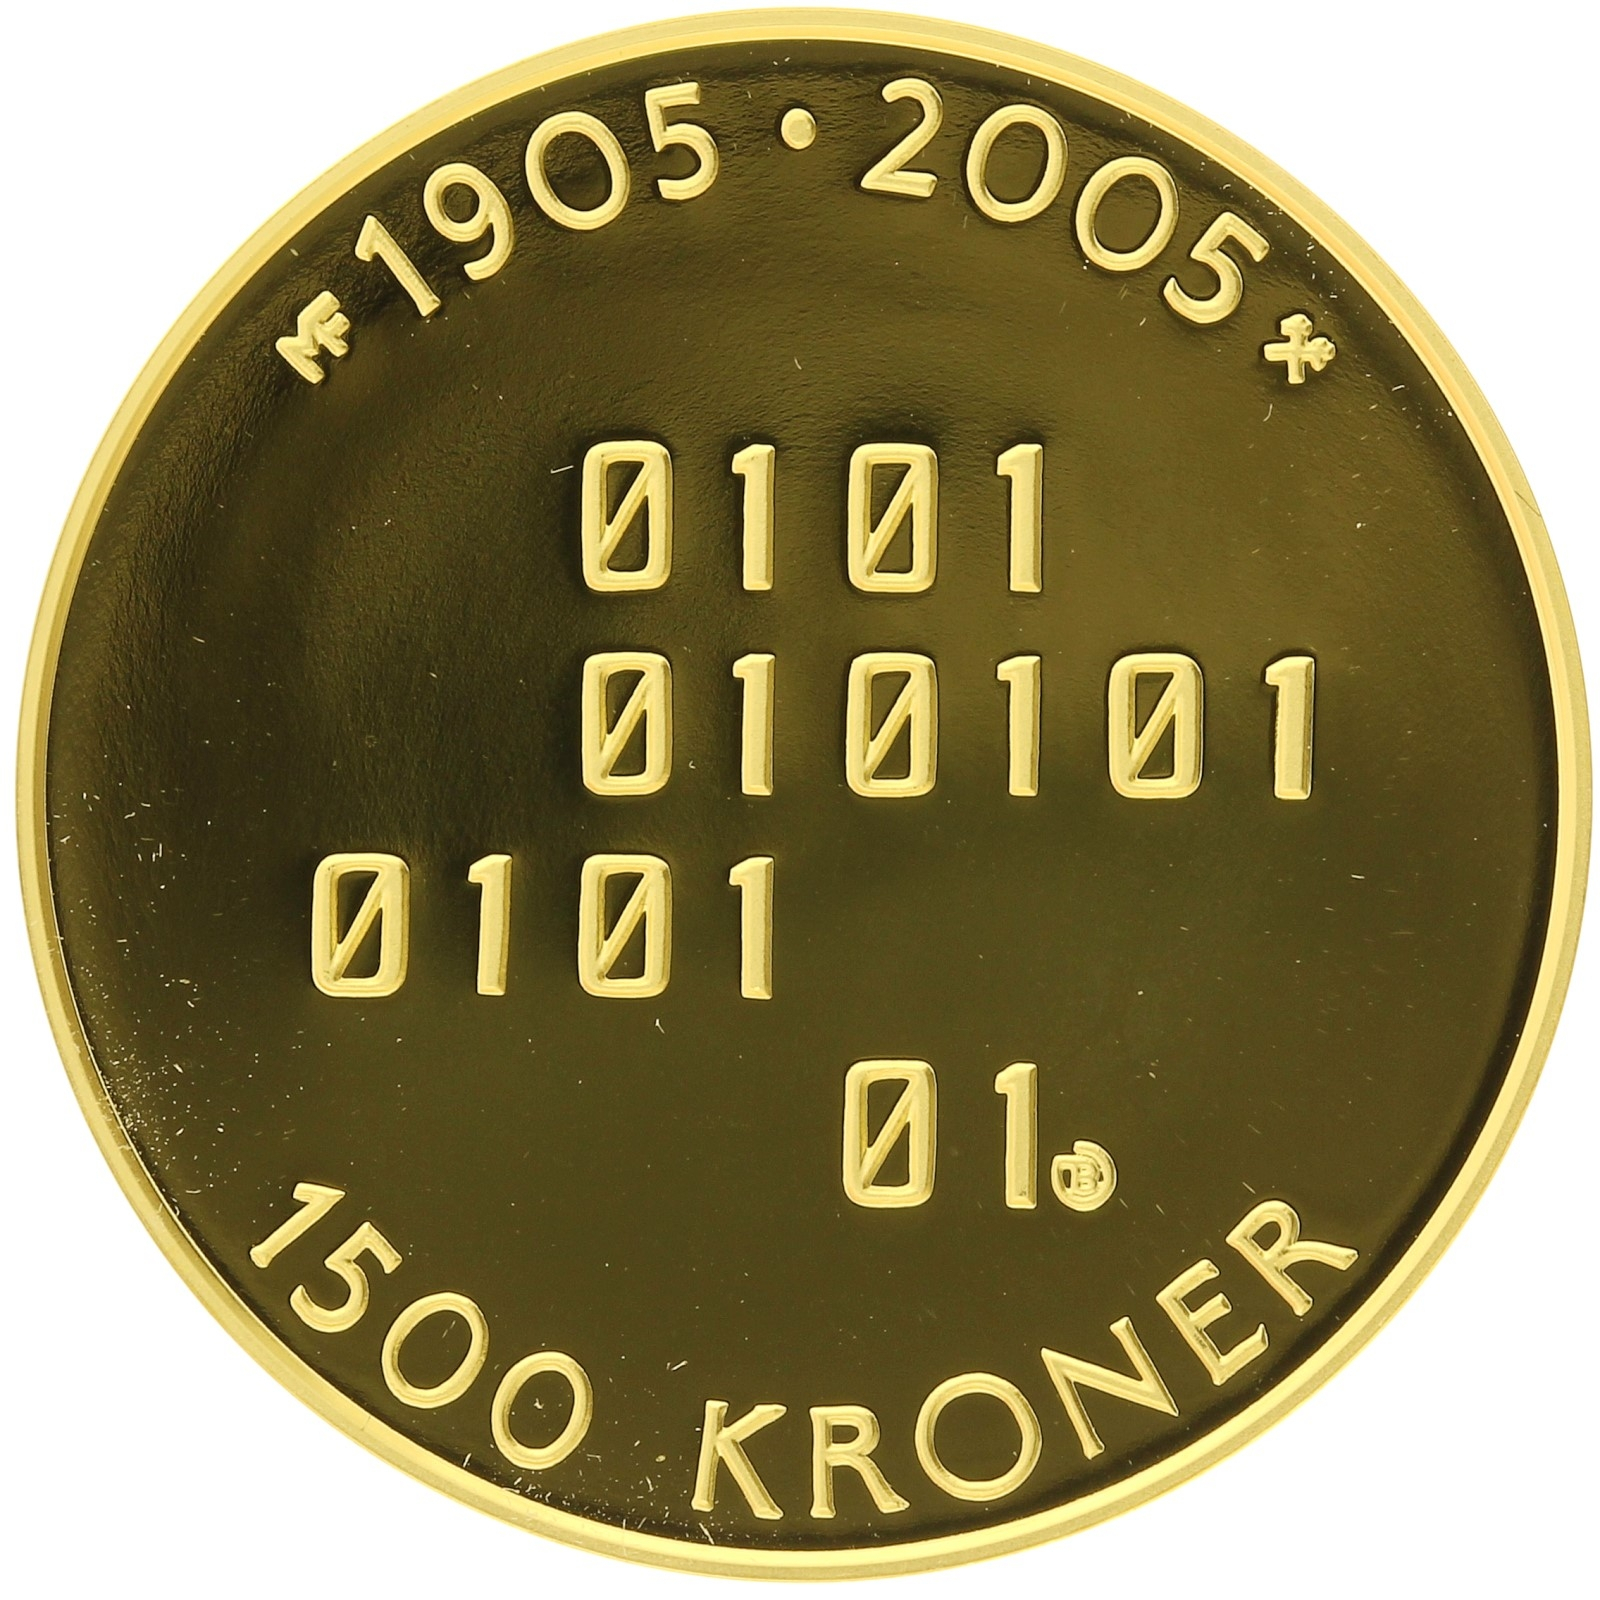 Norway - 1500 Kroner - 2005 - Harald V Dissolution of the Union - 1/2oz